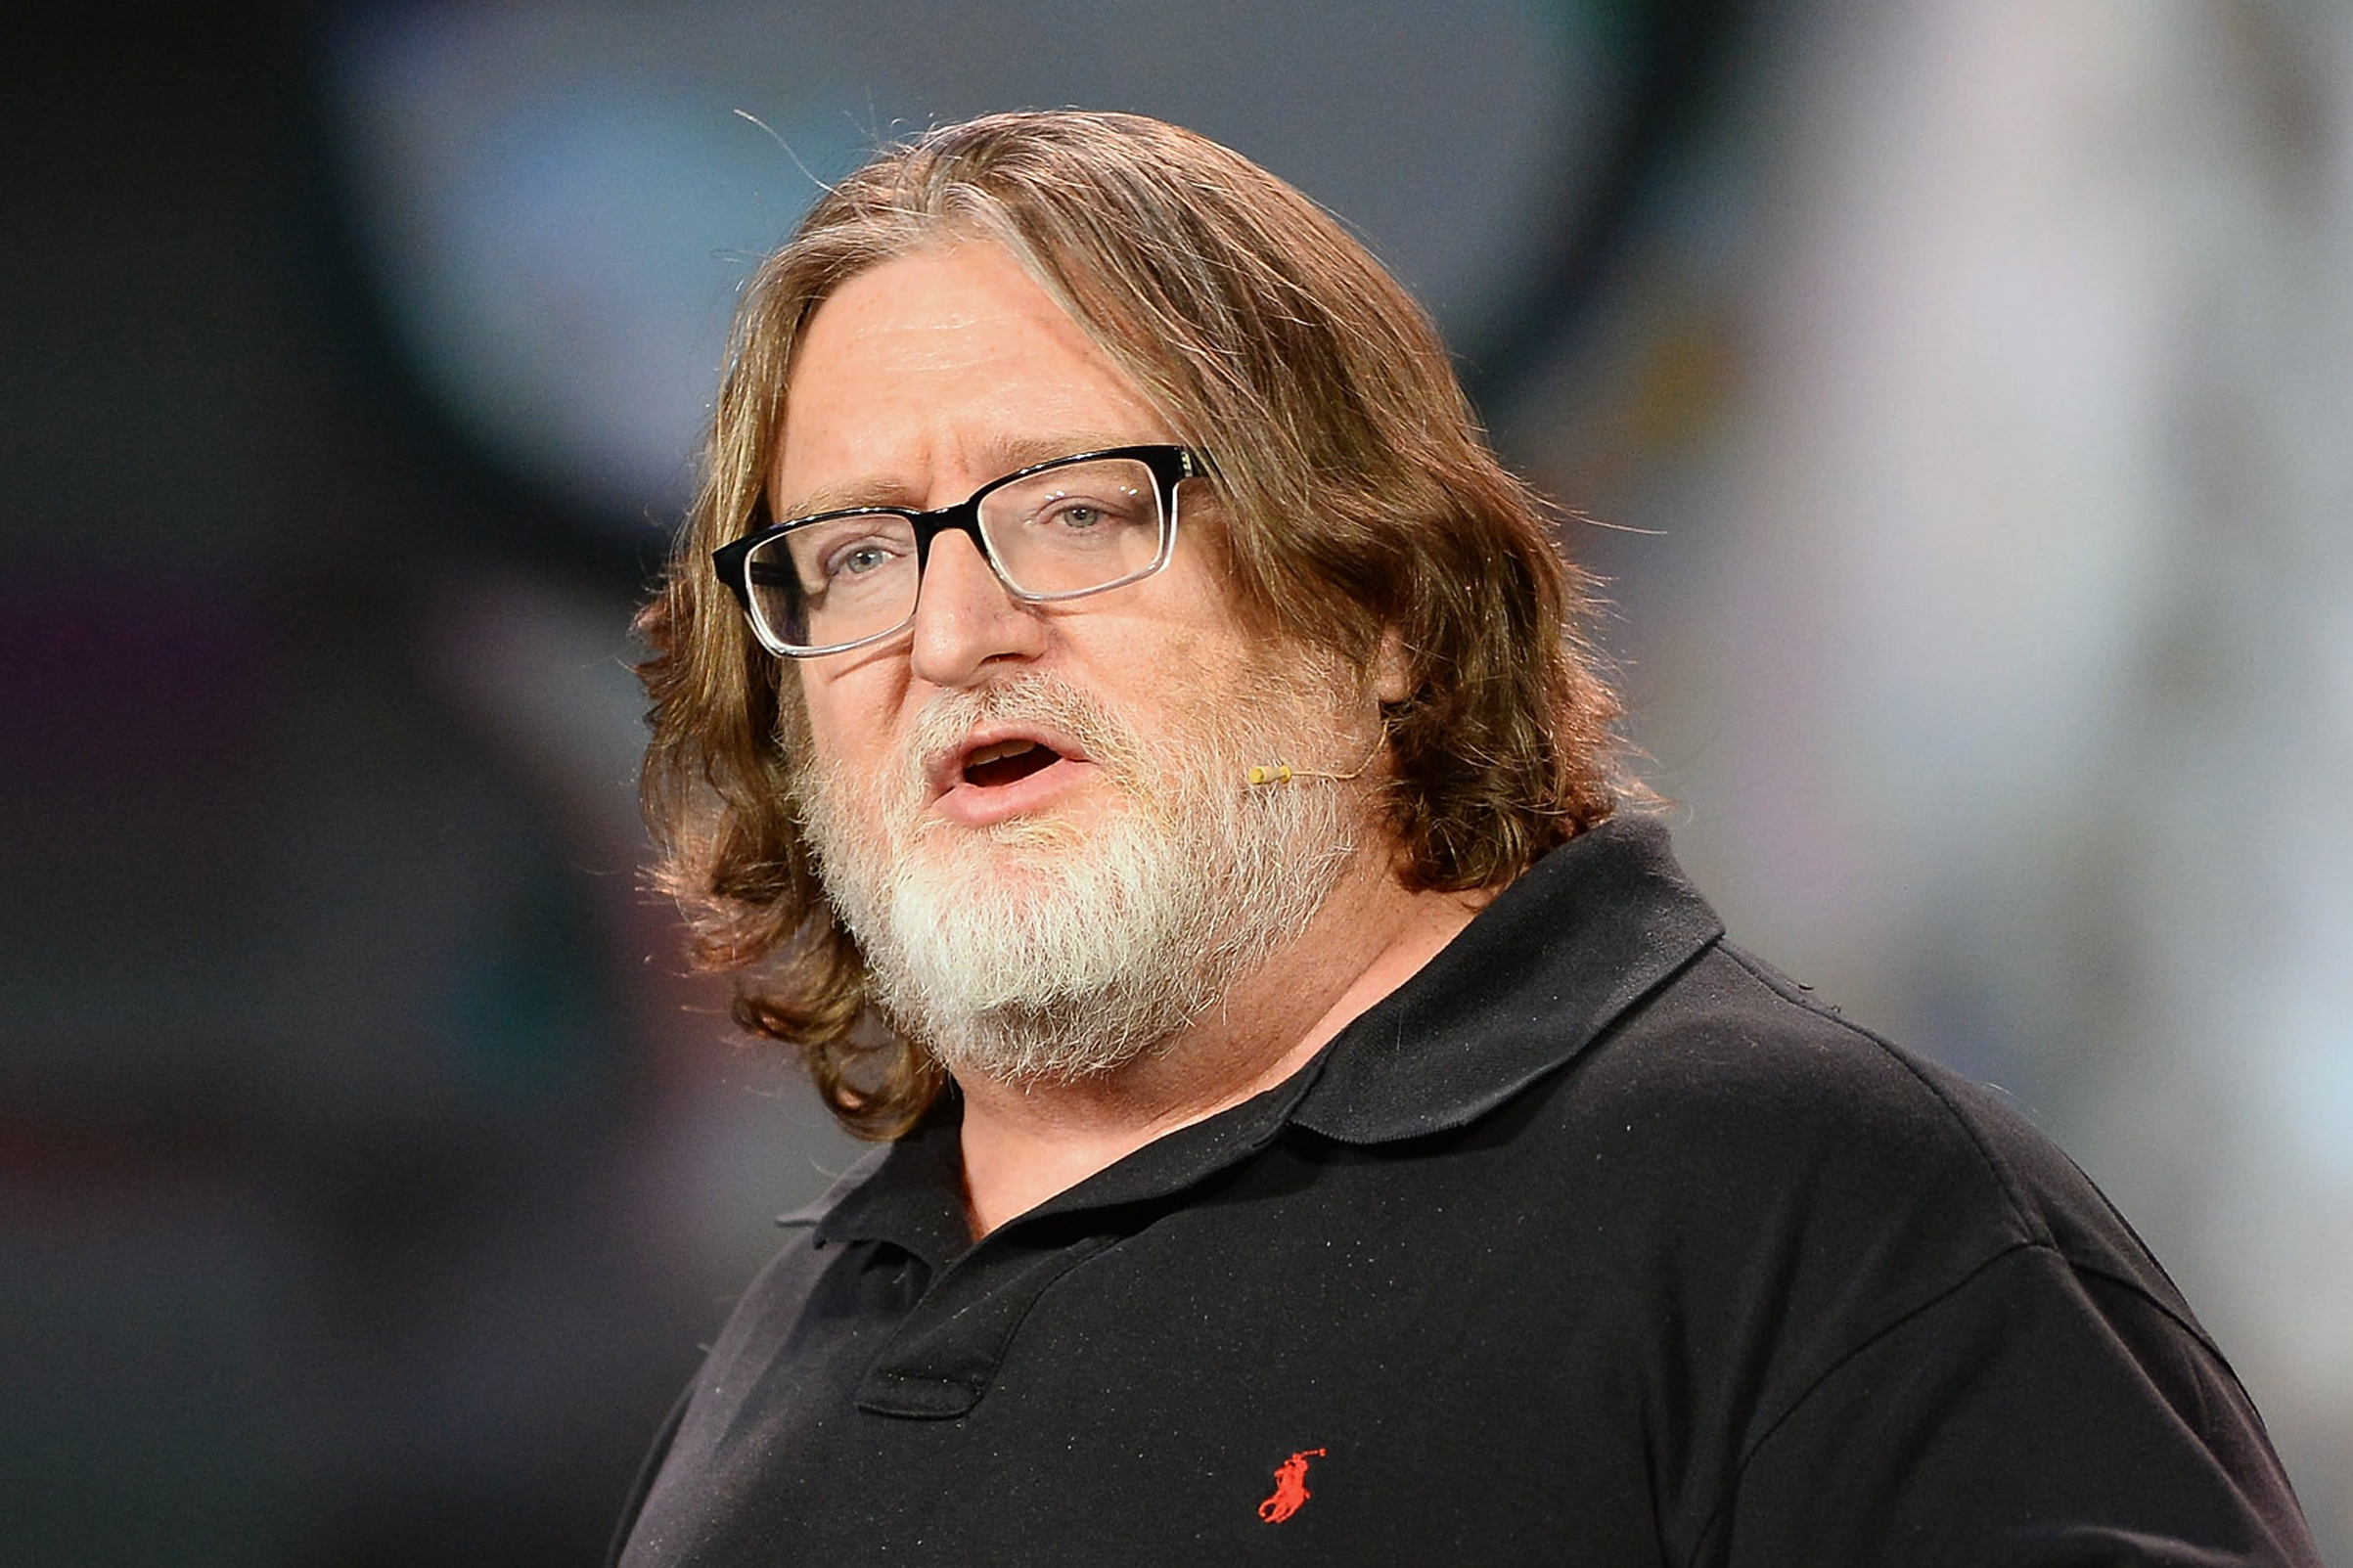 Gabe Newell, co-founder of video game developer and distributor Valve, speaks during Krzanich's keynote address at the 2014 International CES at The Venetian Las Vegas on January 6, 2014 in Las Vegas, Nevada. (Ethan Miller—Getty Images)